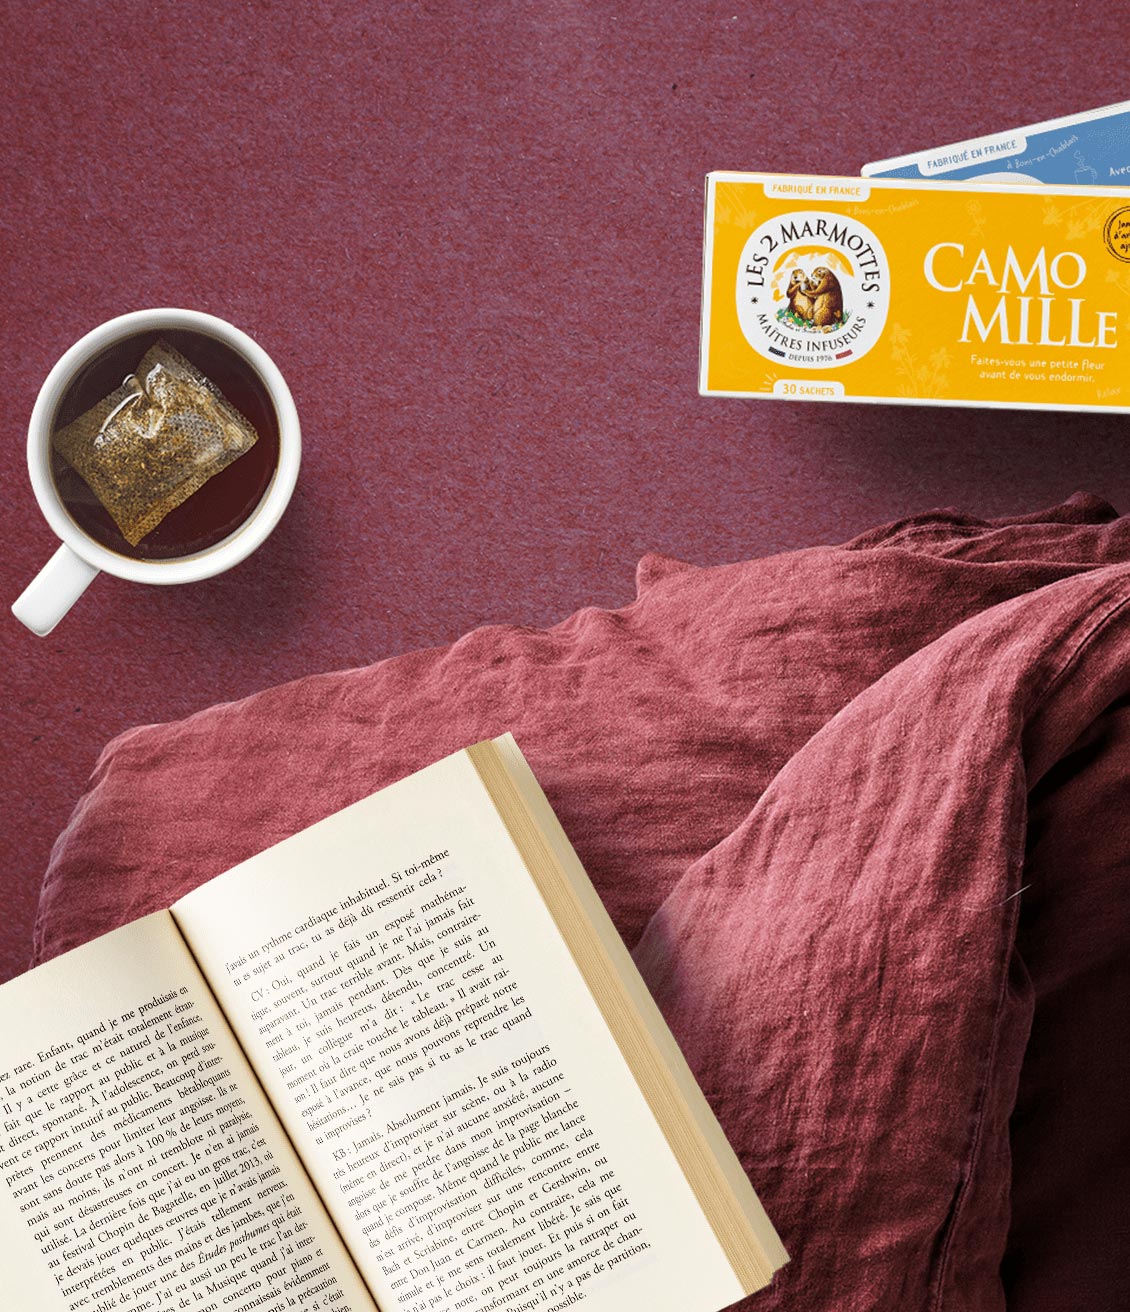 What herbal tea do you like best when reading ?